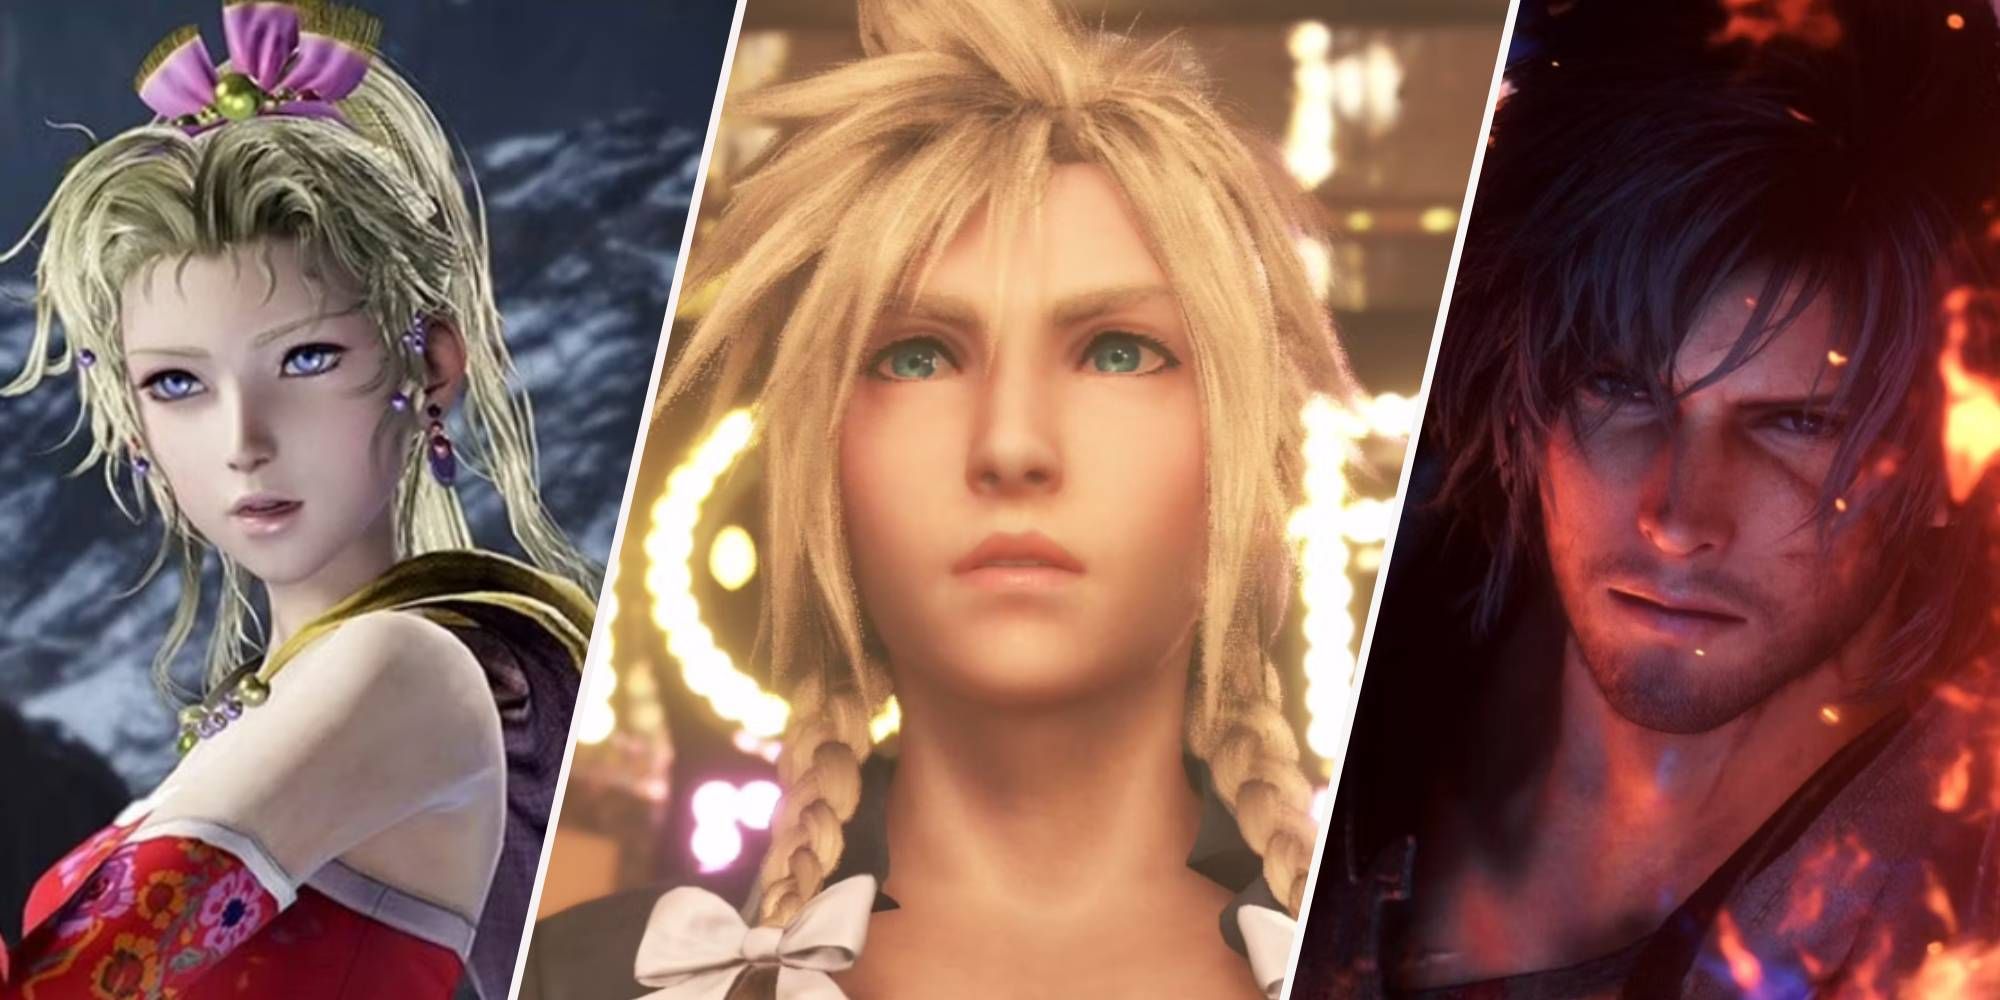 Terra Cloud and Clive Final Fantasy heroes with faces side by side